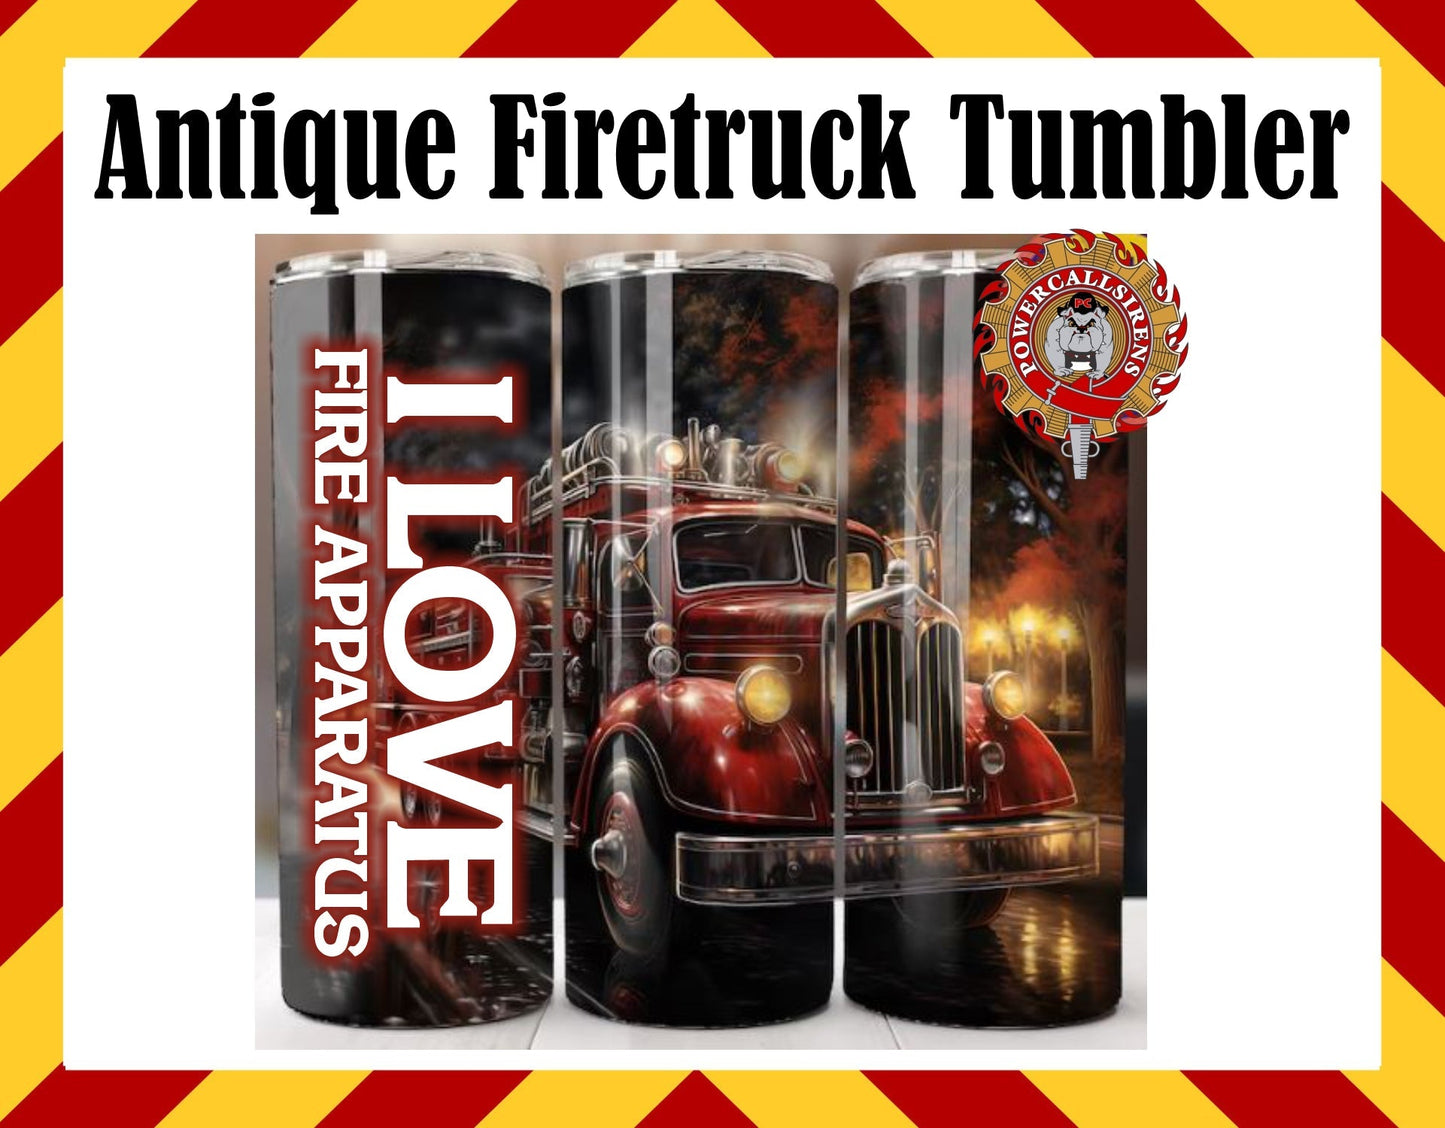 Stainless Steel Cup - I Love Fire Apparatus Design Hot/Cold Cup